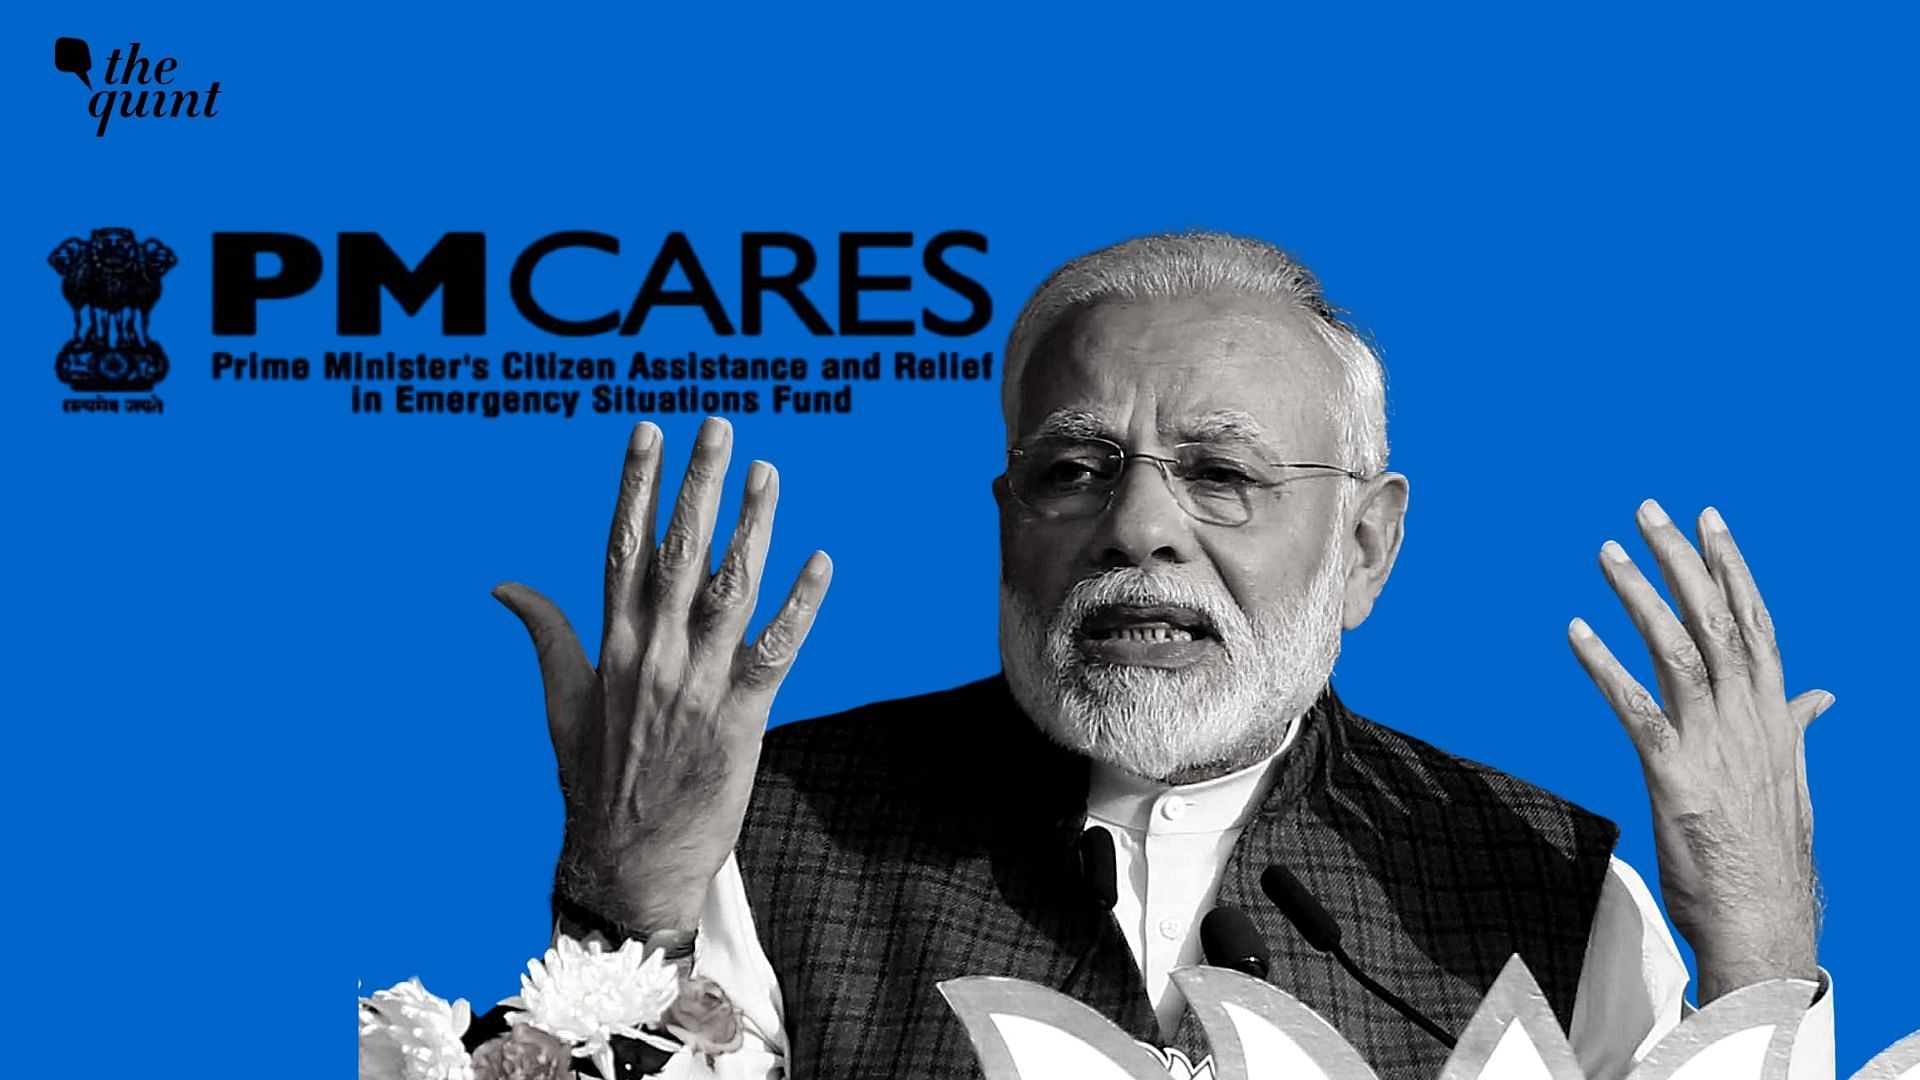 In late March, Prime Minister Modi announced the formation of a special fund to address the emergency situation caused by the COVID-19 pandemic. Called the Prime Minister’s Citizen Assistance and Relief in Emergency Situations Fund (PM-CARES Fund), it has attracted controversy right from the start.